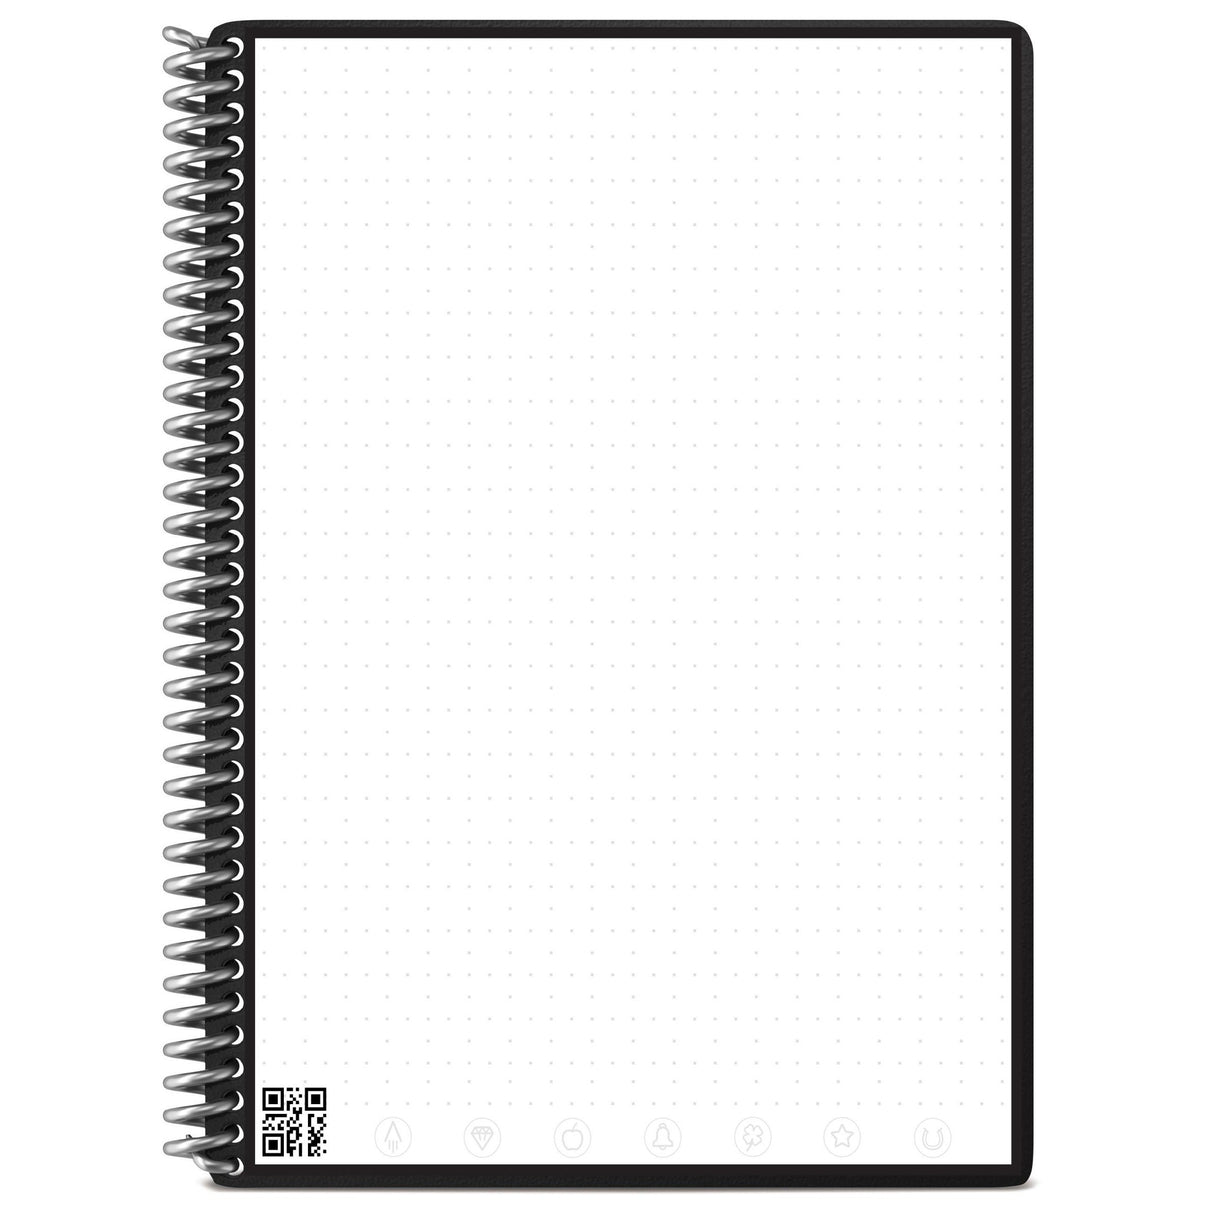 BIC A5 Rocketbook Core Executive Dotted - Black - 36 Pages | Stationery Shop UK